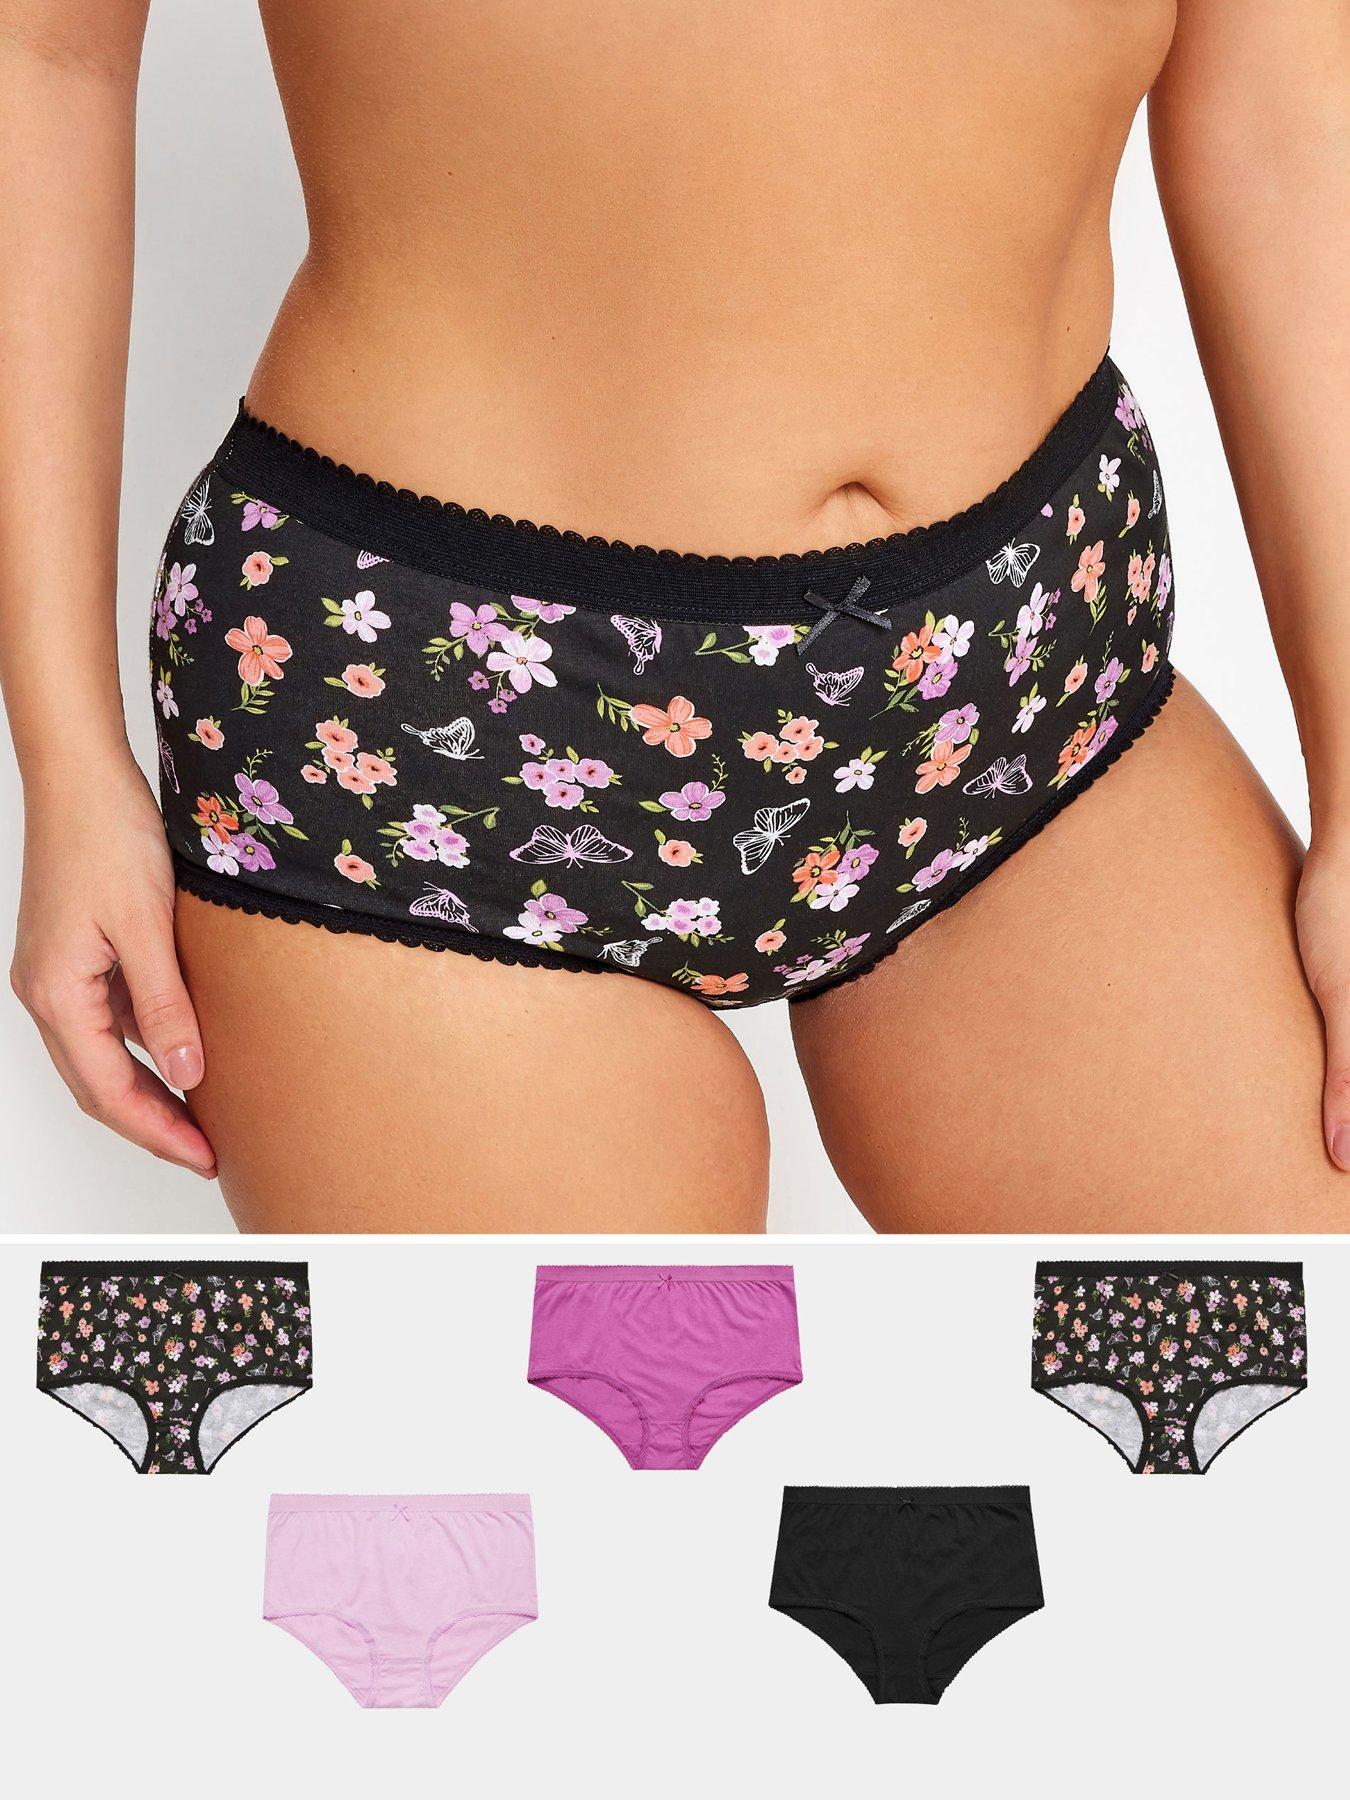  Low Rise All-Over White Floral Lace With Bow & Pink Trim Thong  - Knickers : Clothing, Shoes & Jewelry